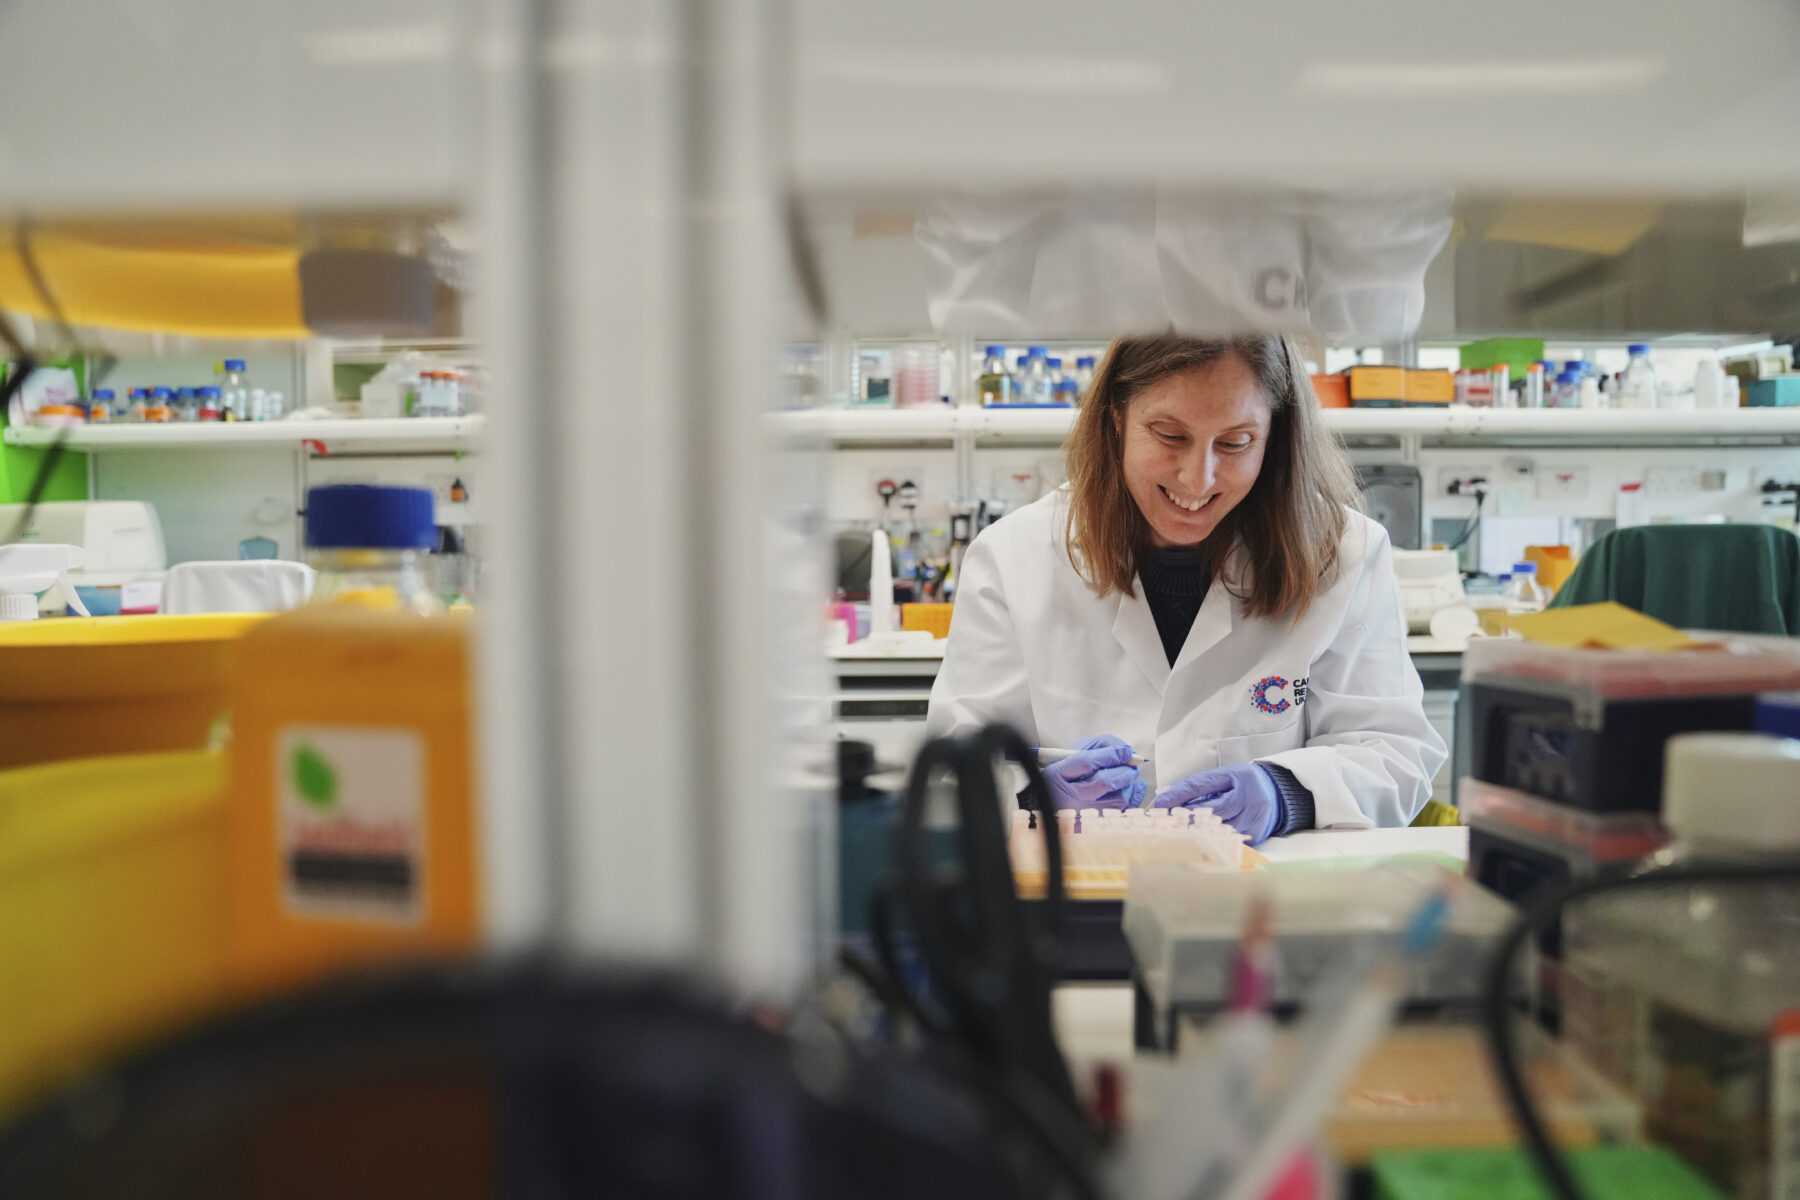 A Cancer Research UK-funded researcher in the lab.